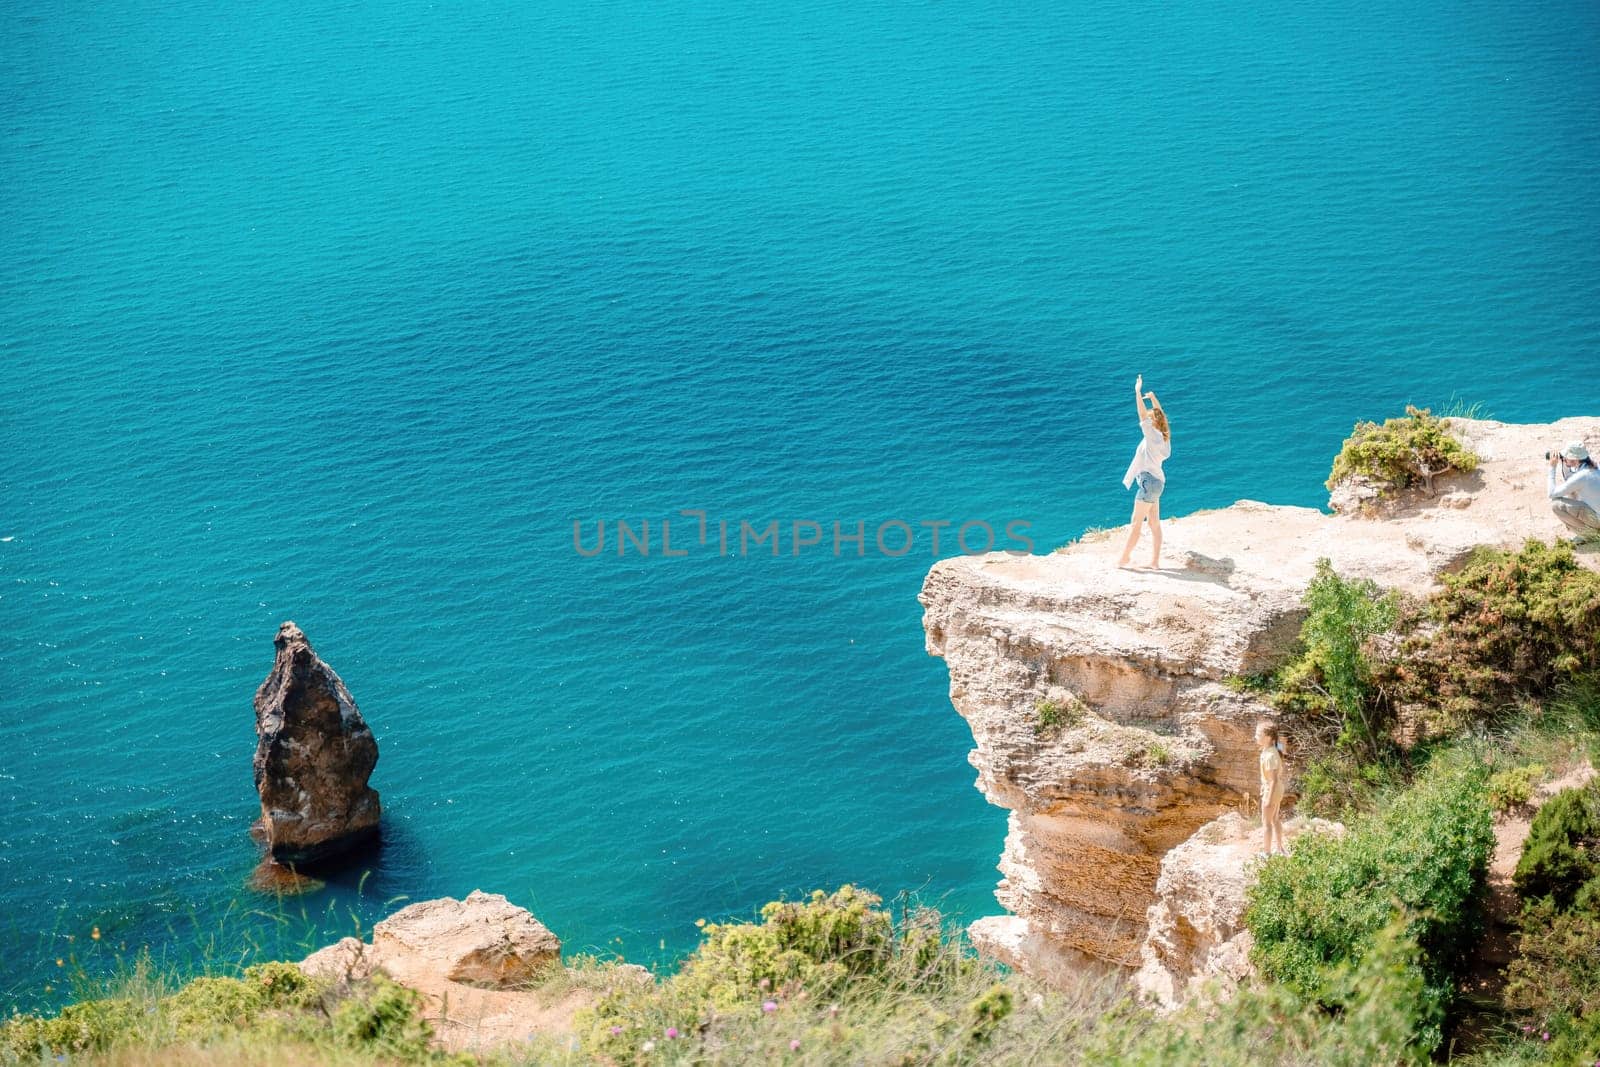 A woman stands on a cliff overlooking the ocean. The water is blue and the sky is clear